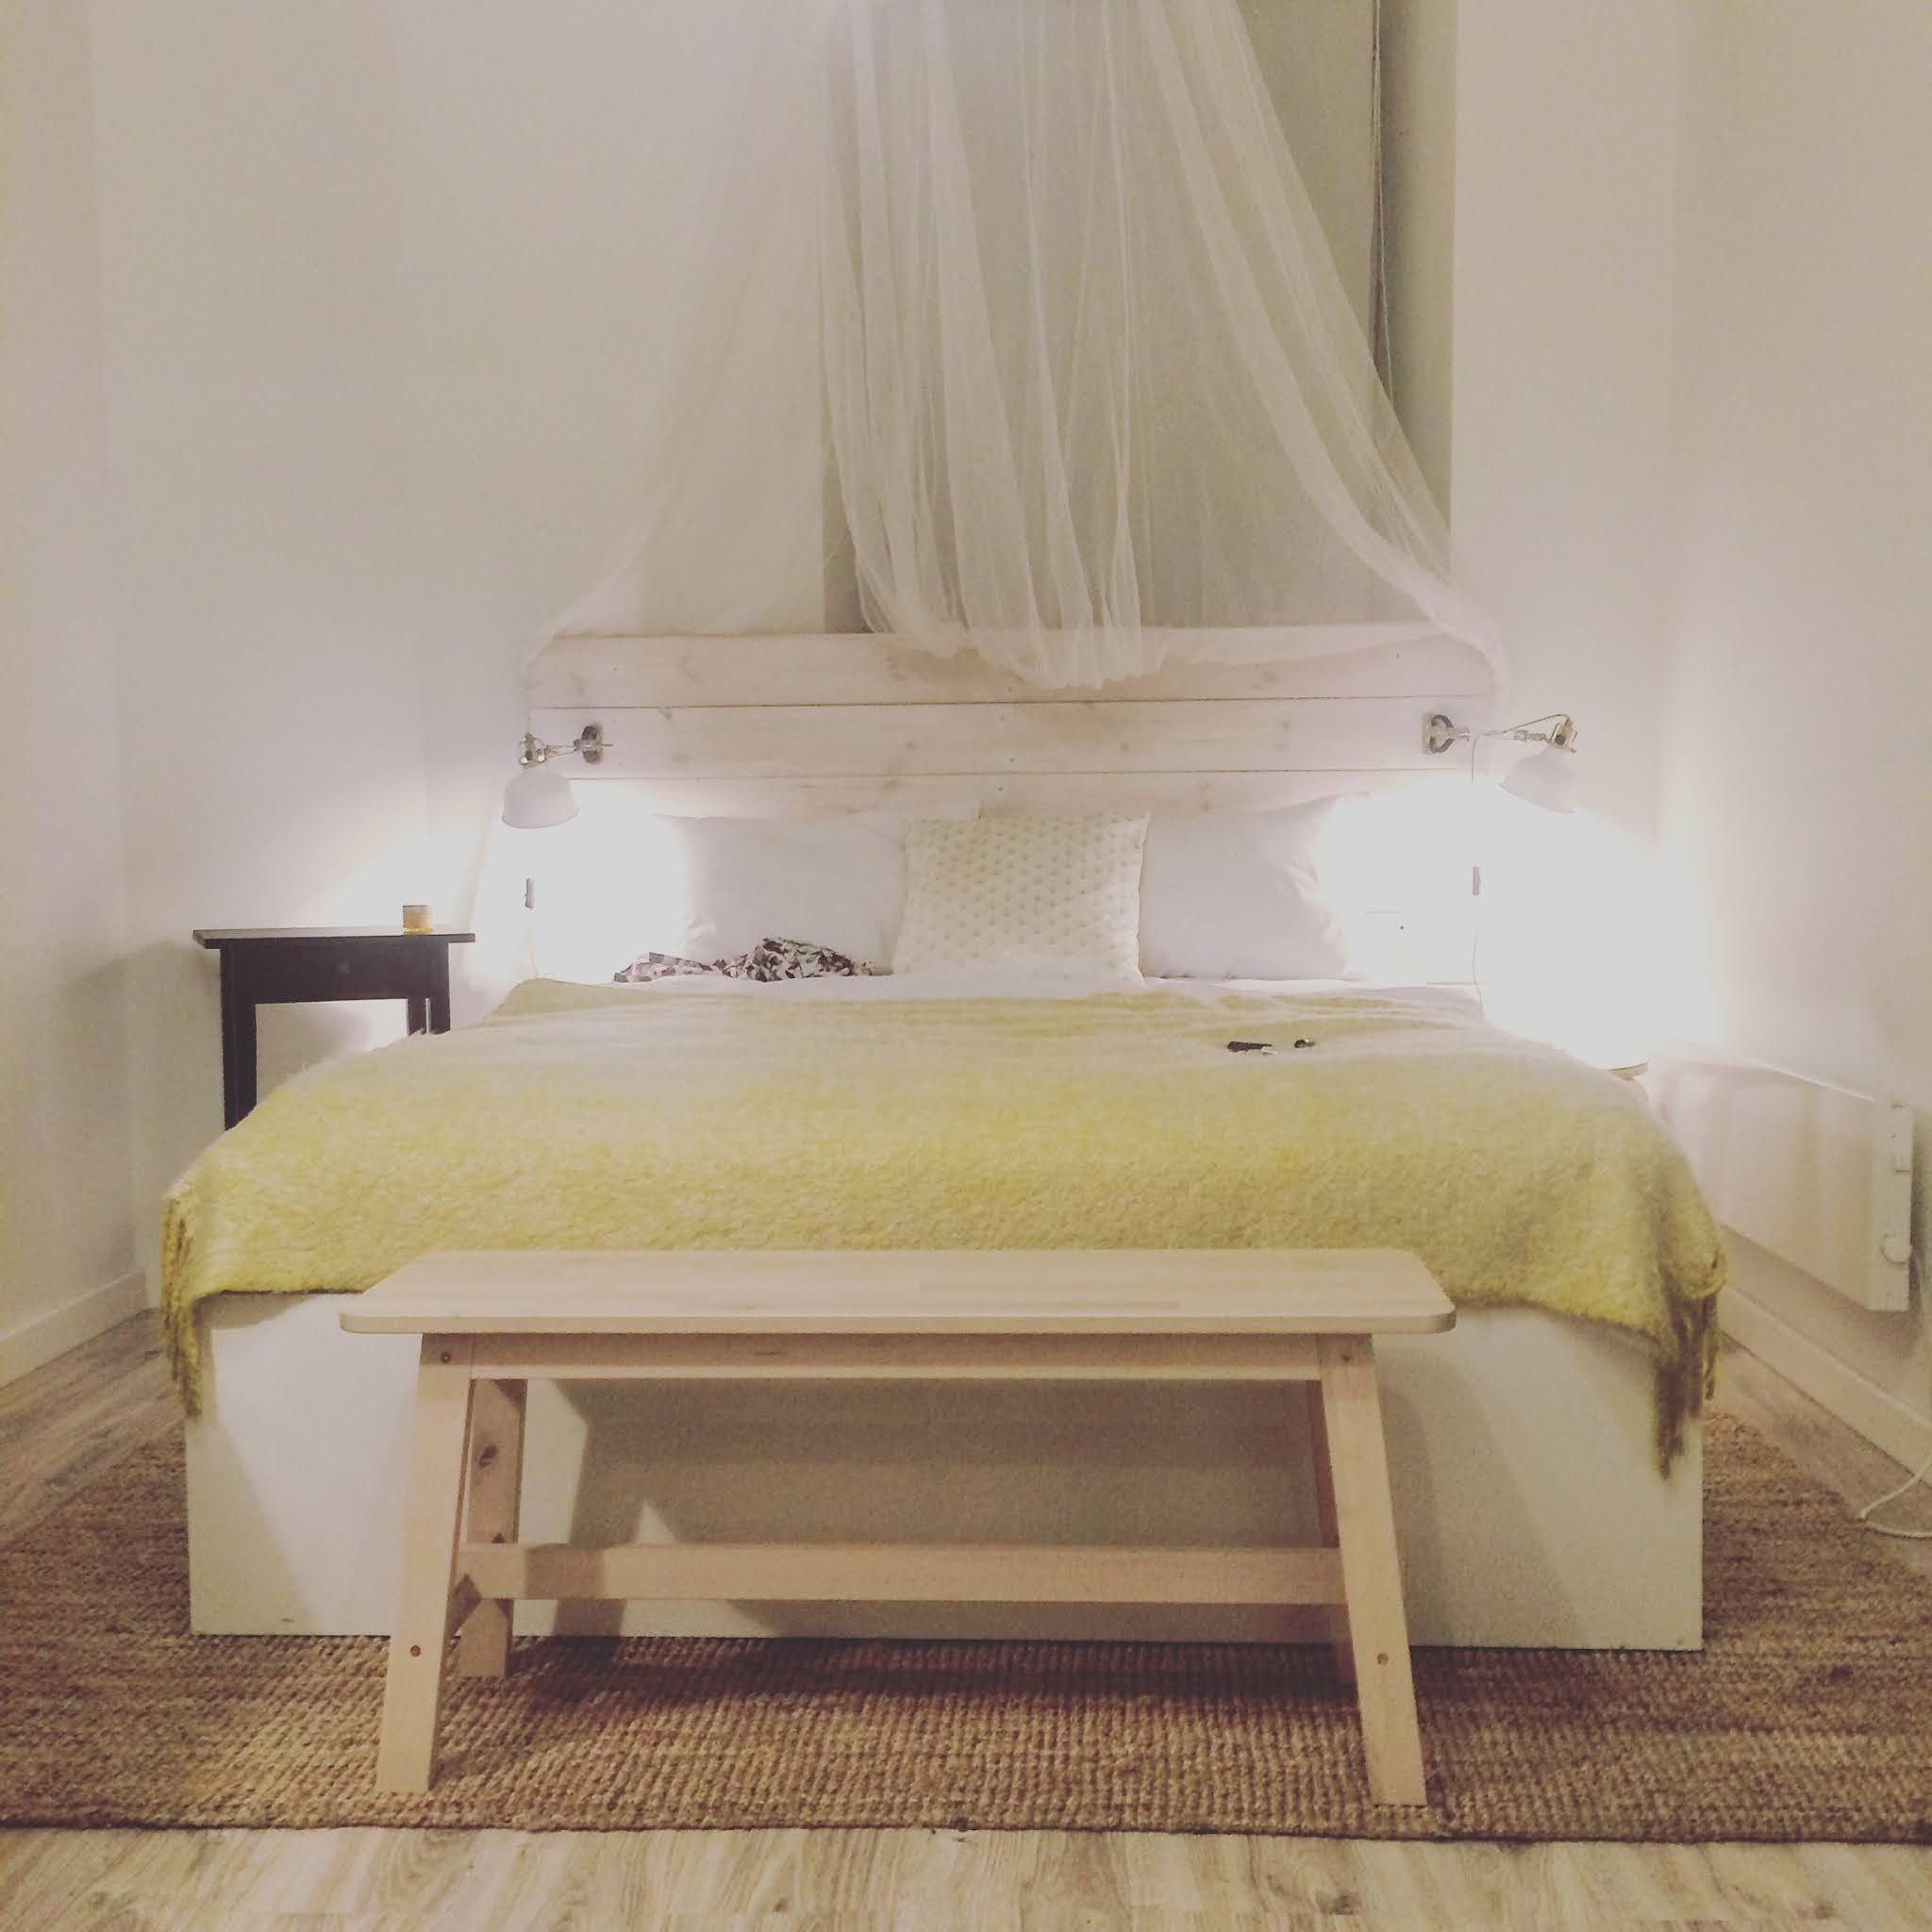 bed with yellow bedspread and wooden floors